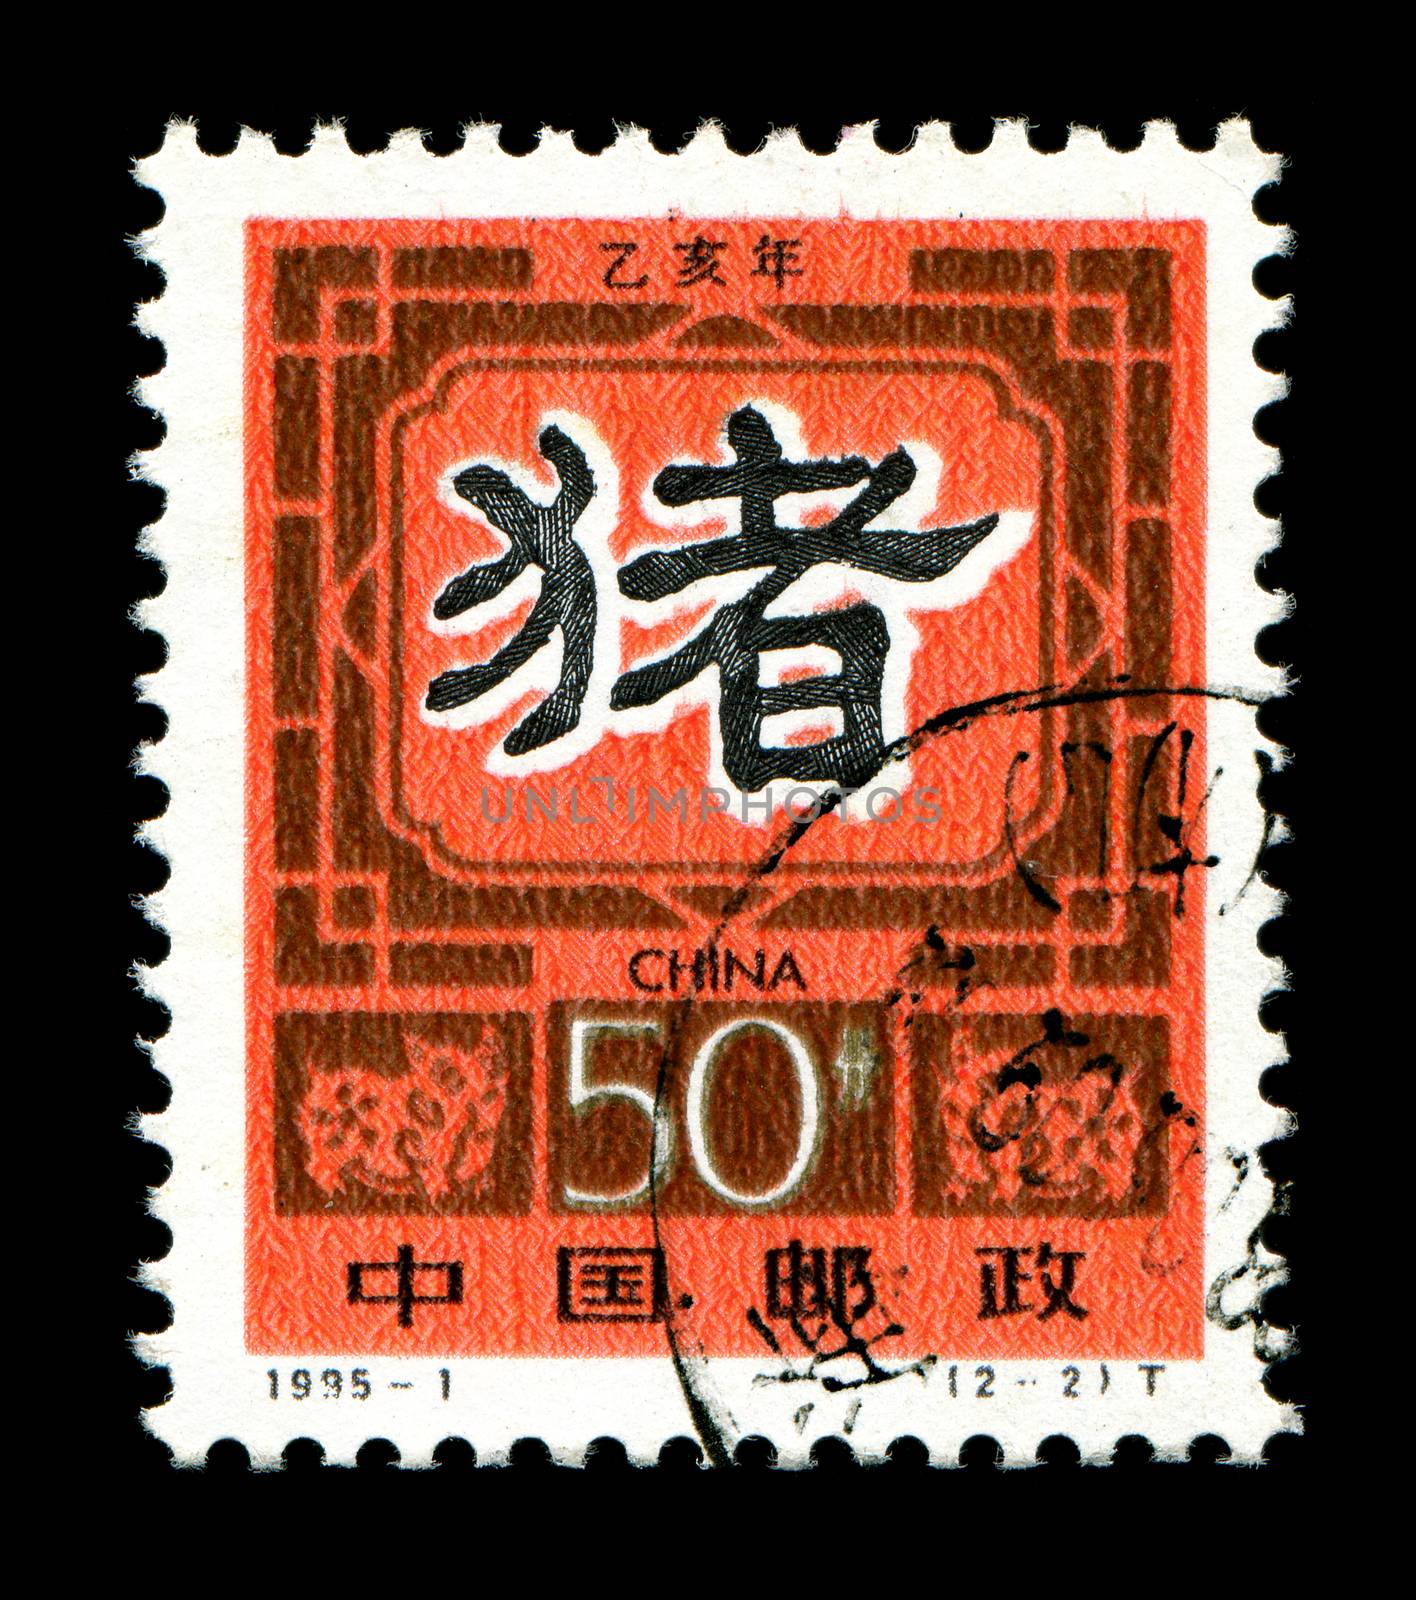 CHINA - CIRCA 1995: A postage stamp printed in China shows 1995 Lunar Year of the Boar.The Boar is one of the 12-year cycle of animals which appear in the Chinese zodiac,circa 1995.